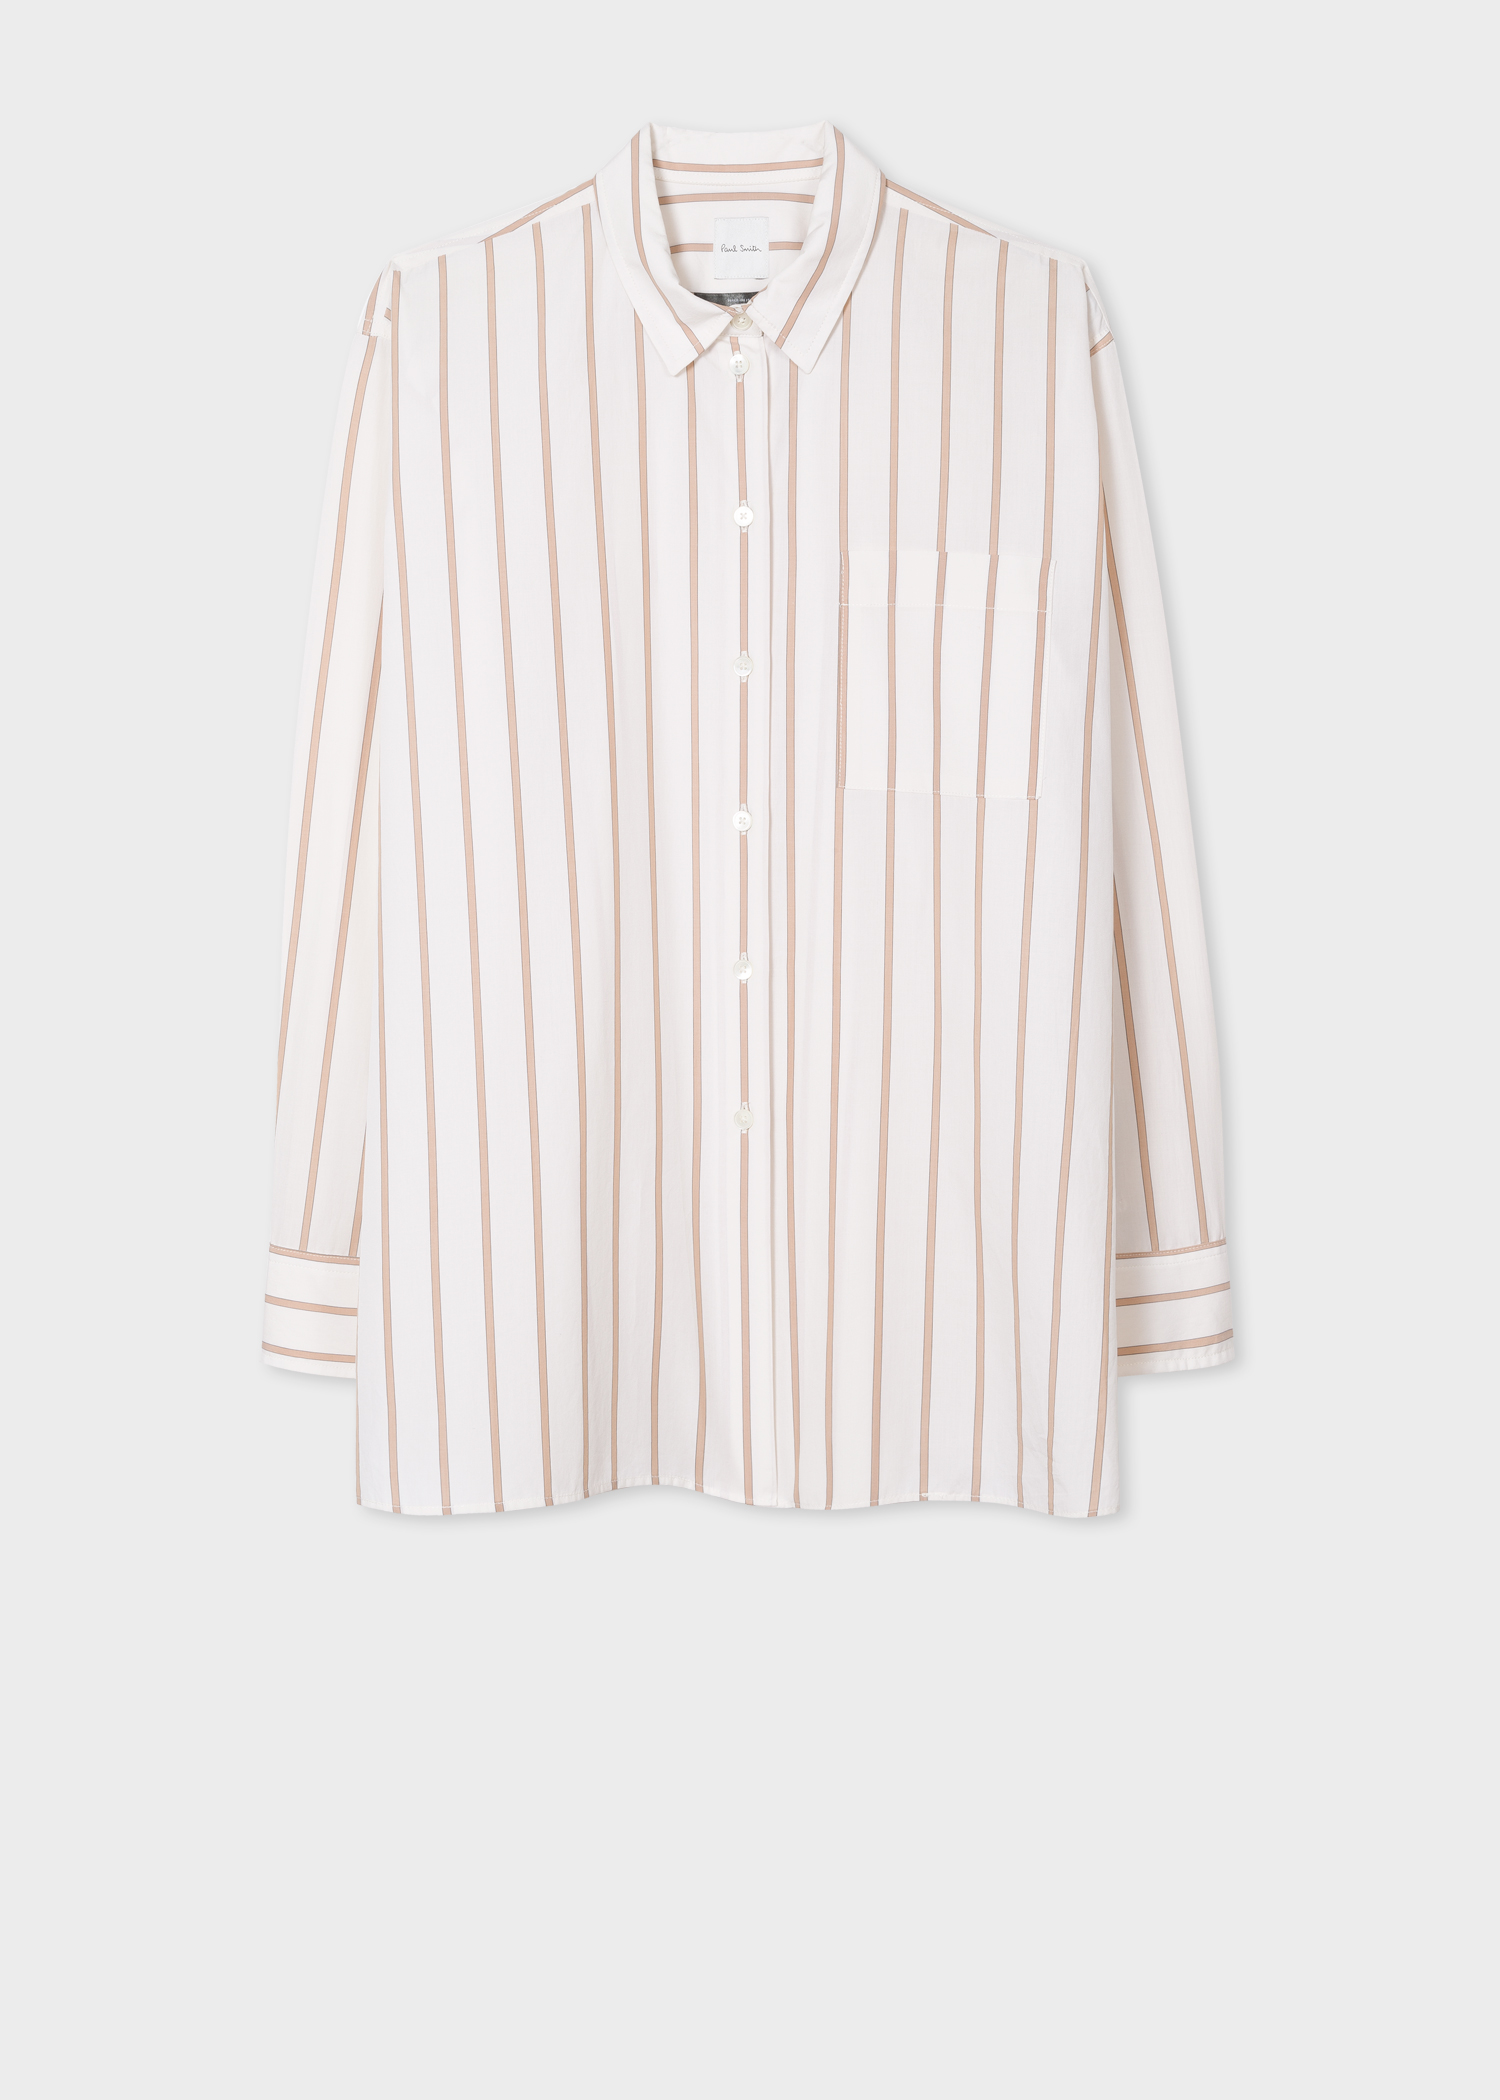 Front view - Women's Cream And Beige Stripe Cotton Shirt Paul Smith